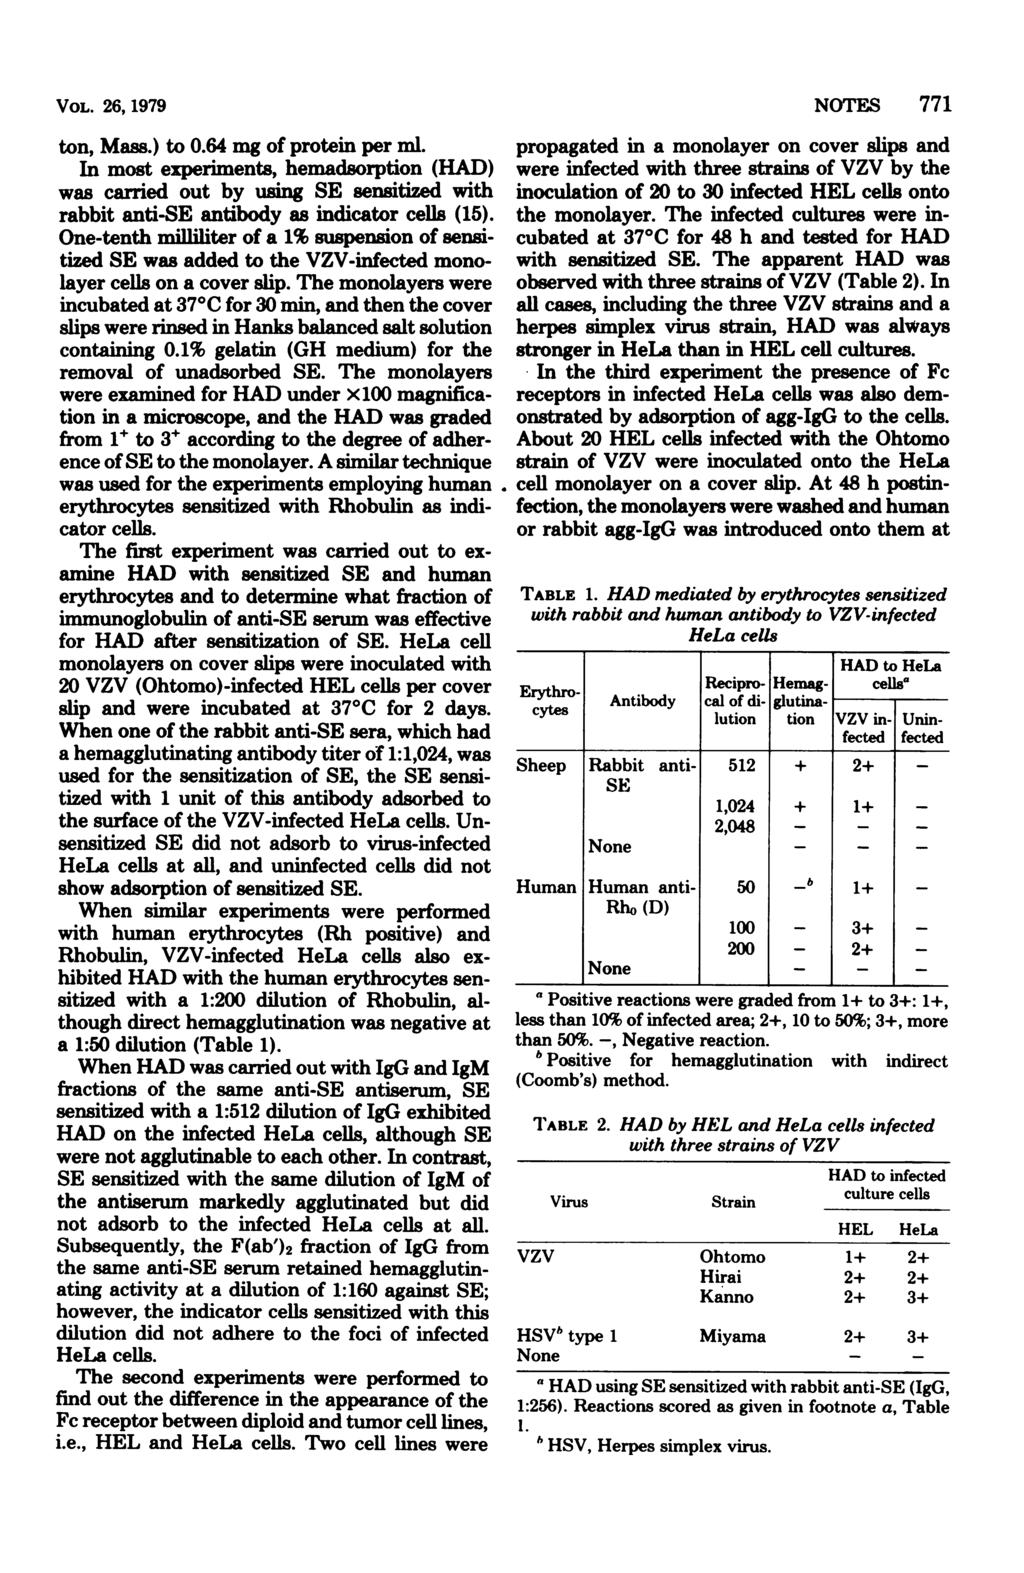 VOL. 26, 1979 ton, Mass.) to.64 mg of protein per ml. In most experiments, hemadsorption (HAD) was carried out by using SE sensitized with rabbit anti-se antibody as indicator cells (15).